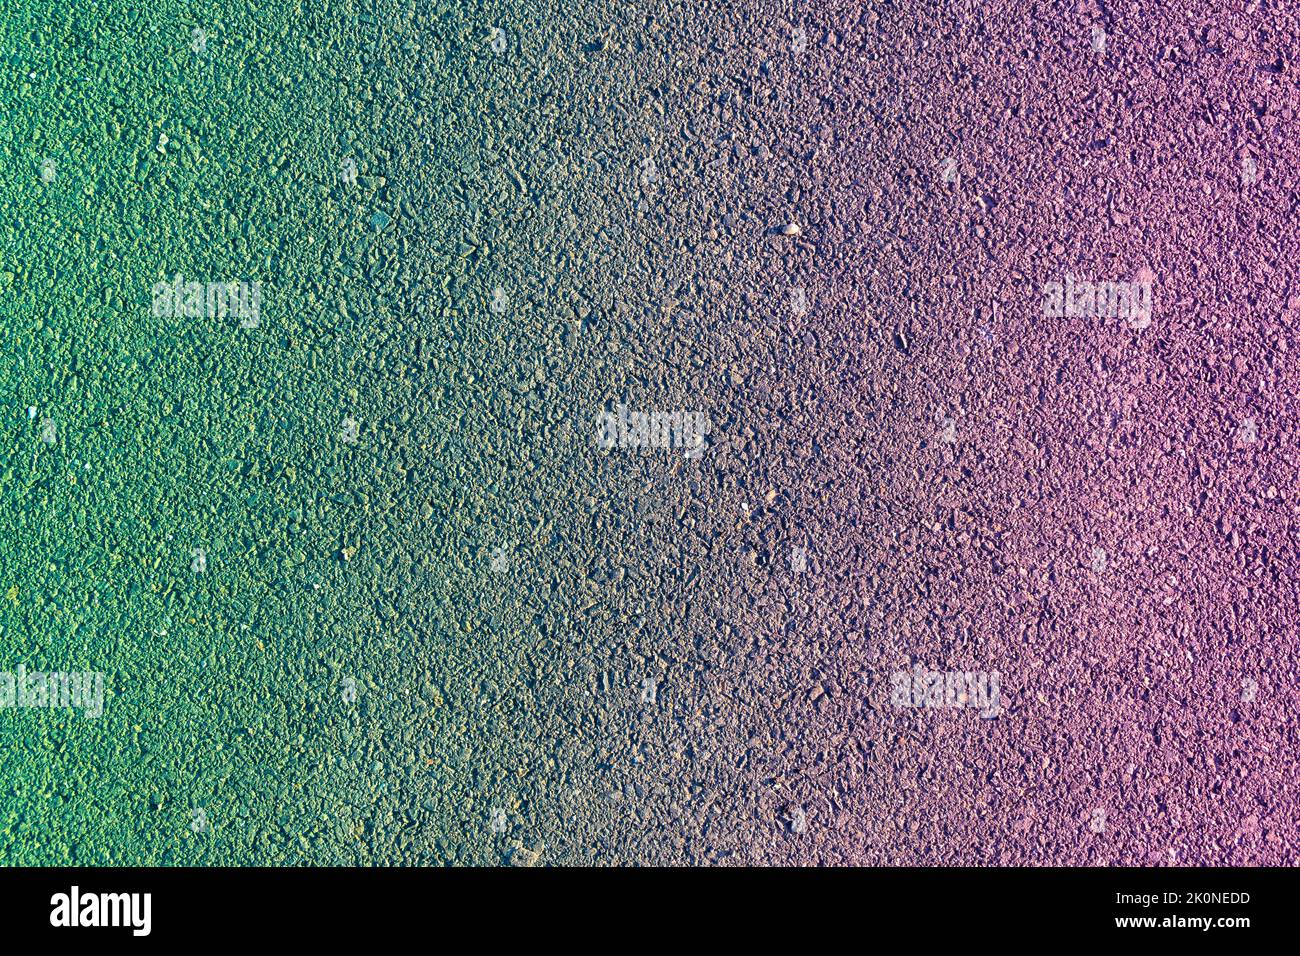 texture of a new asphalt pavement with small stone and sand with a red-green color gradient overlaid, selective focus Stock Photo